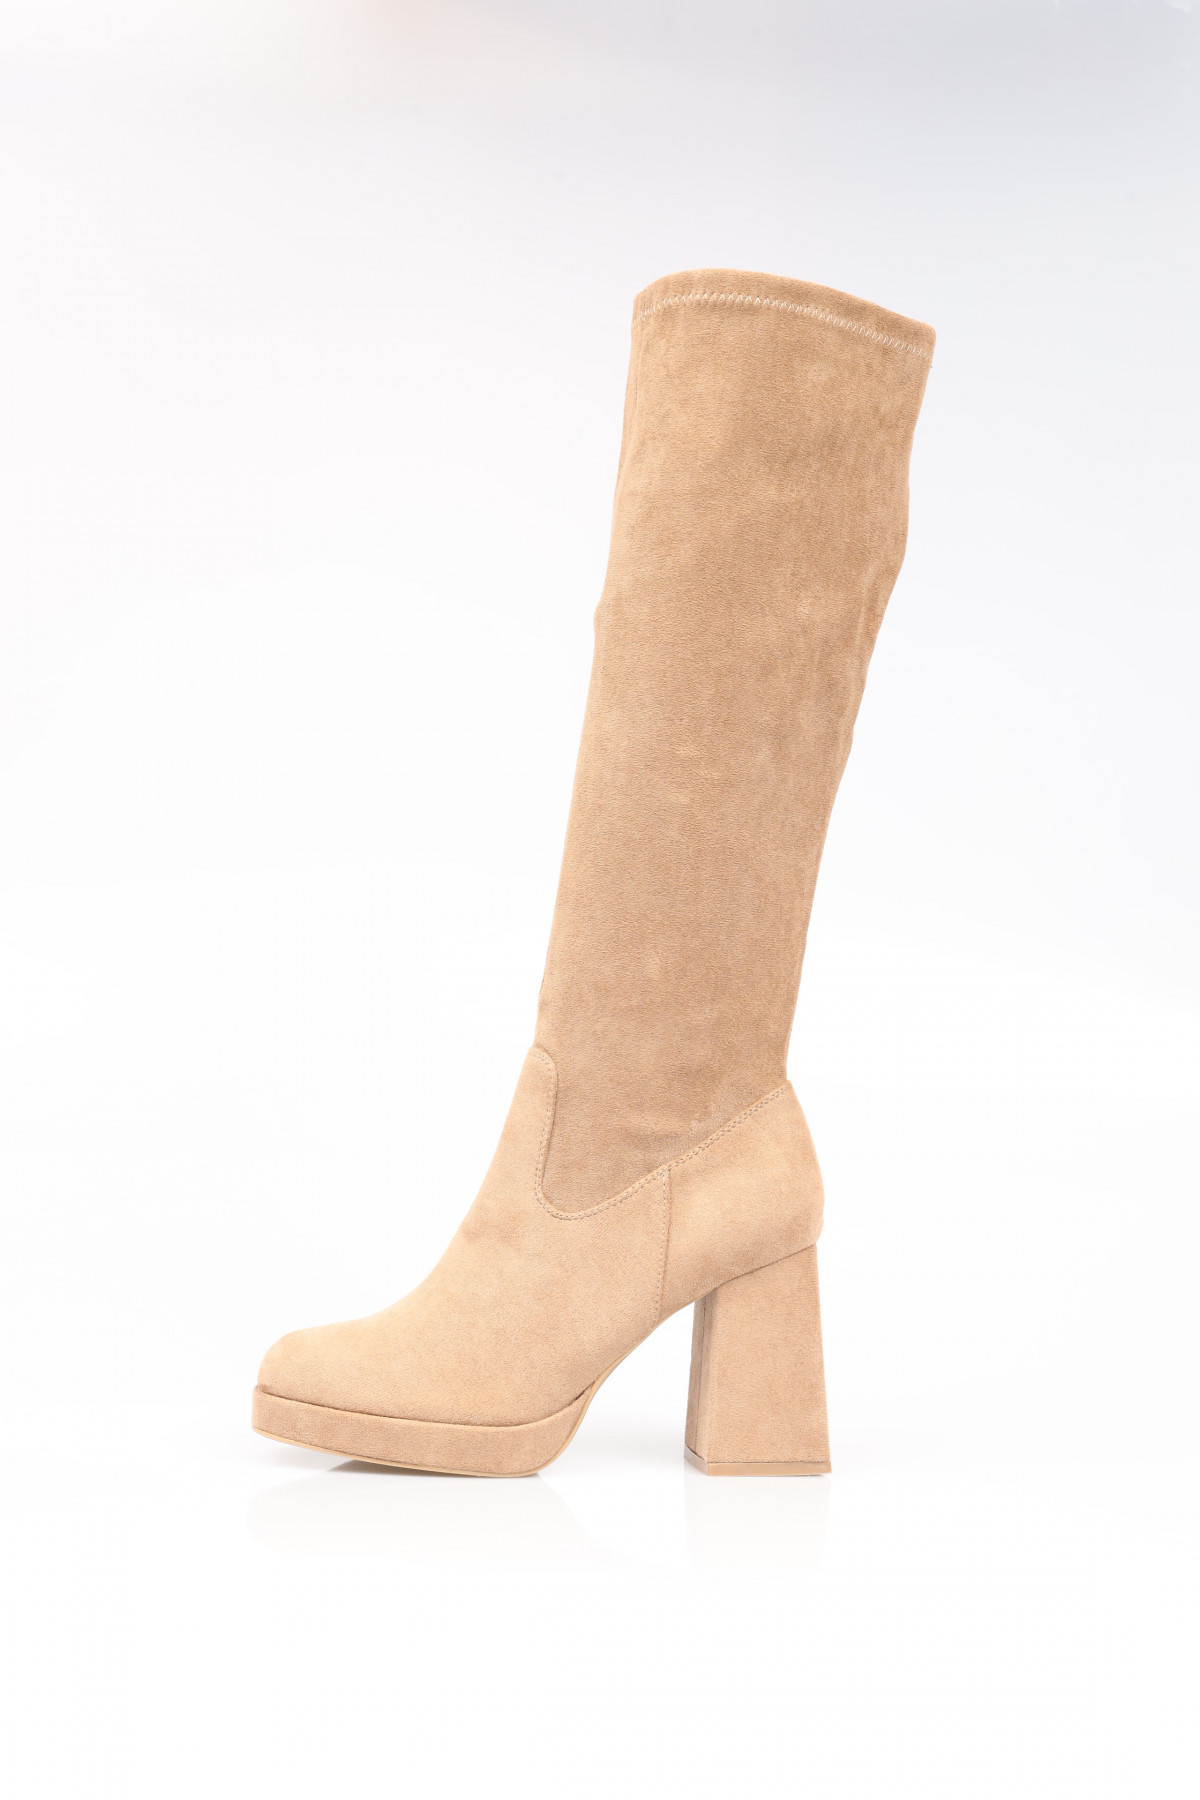 Eco Suede Boot with Heel and Plateau